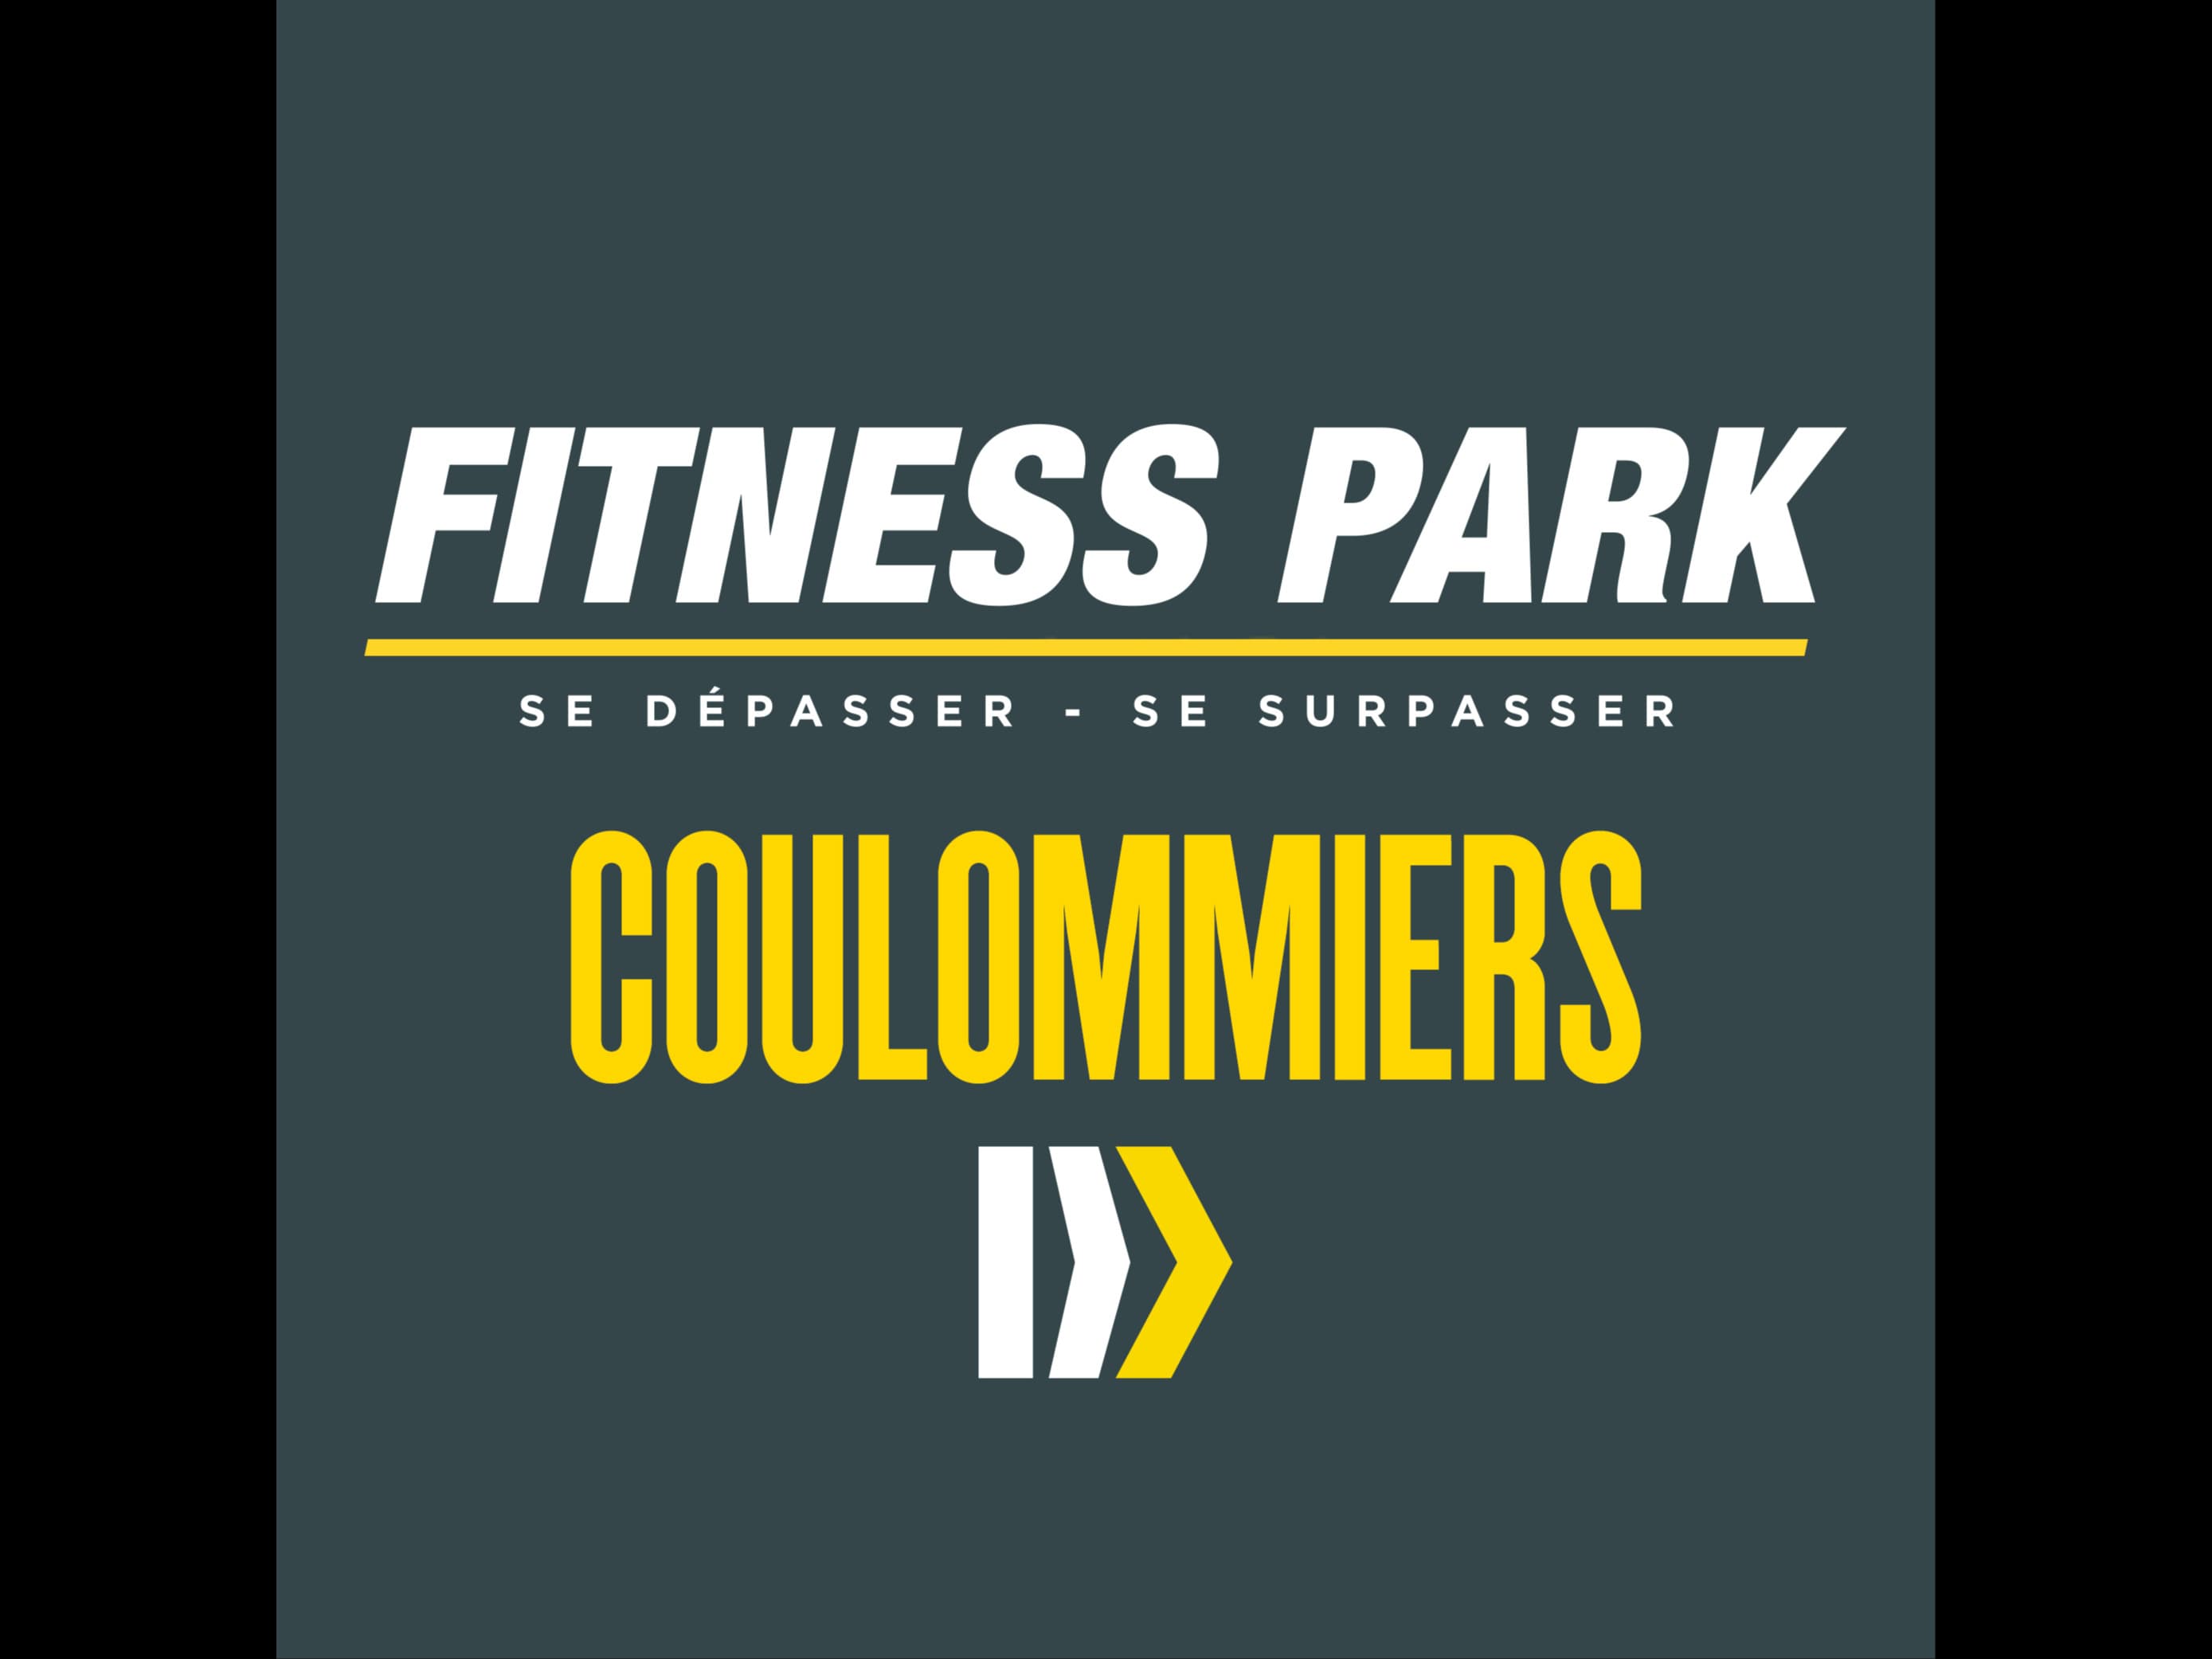 Fitness Park coulommiers